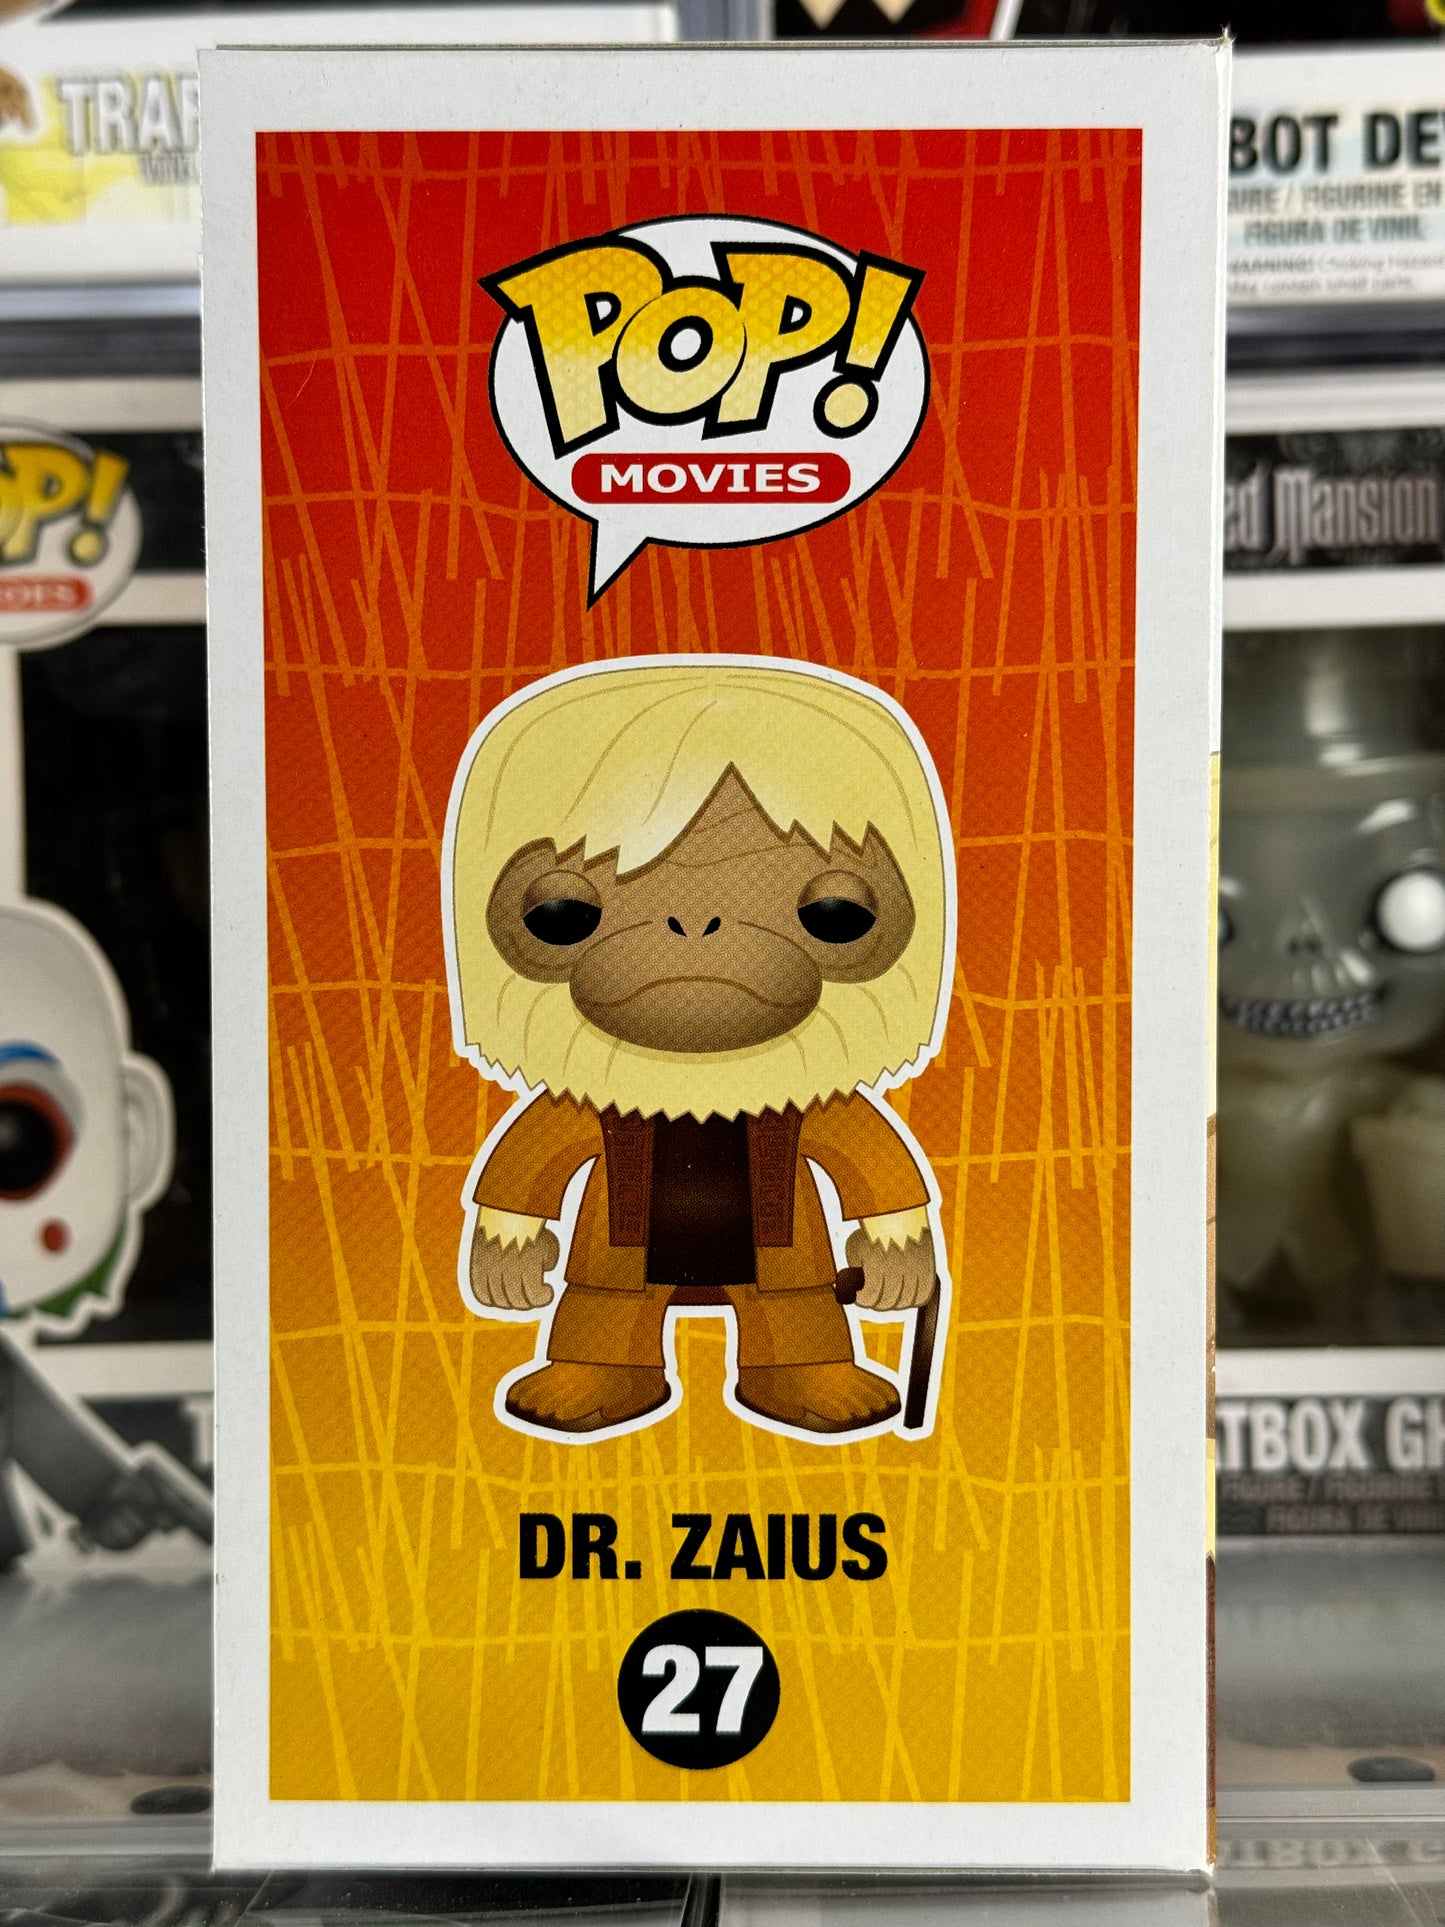 Planet of the Apes - Dr. Zaius (27) Vaulted